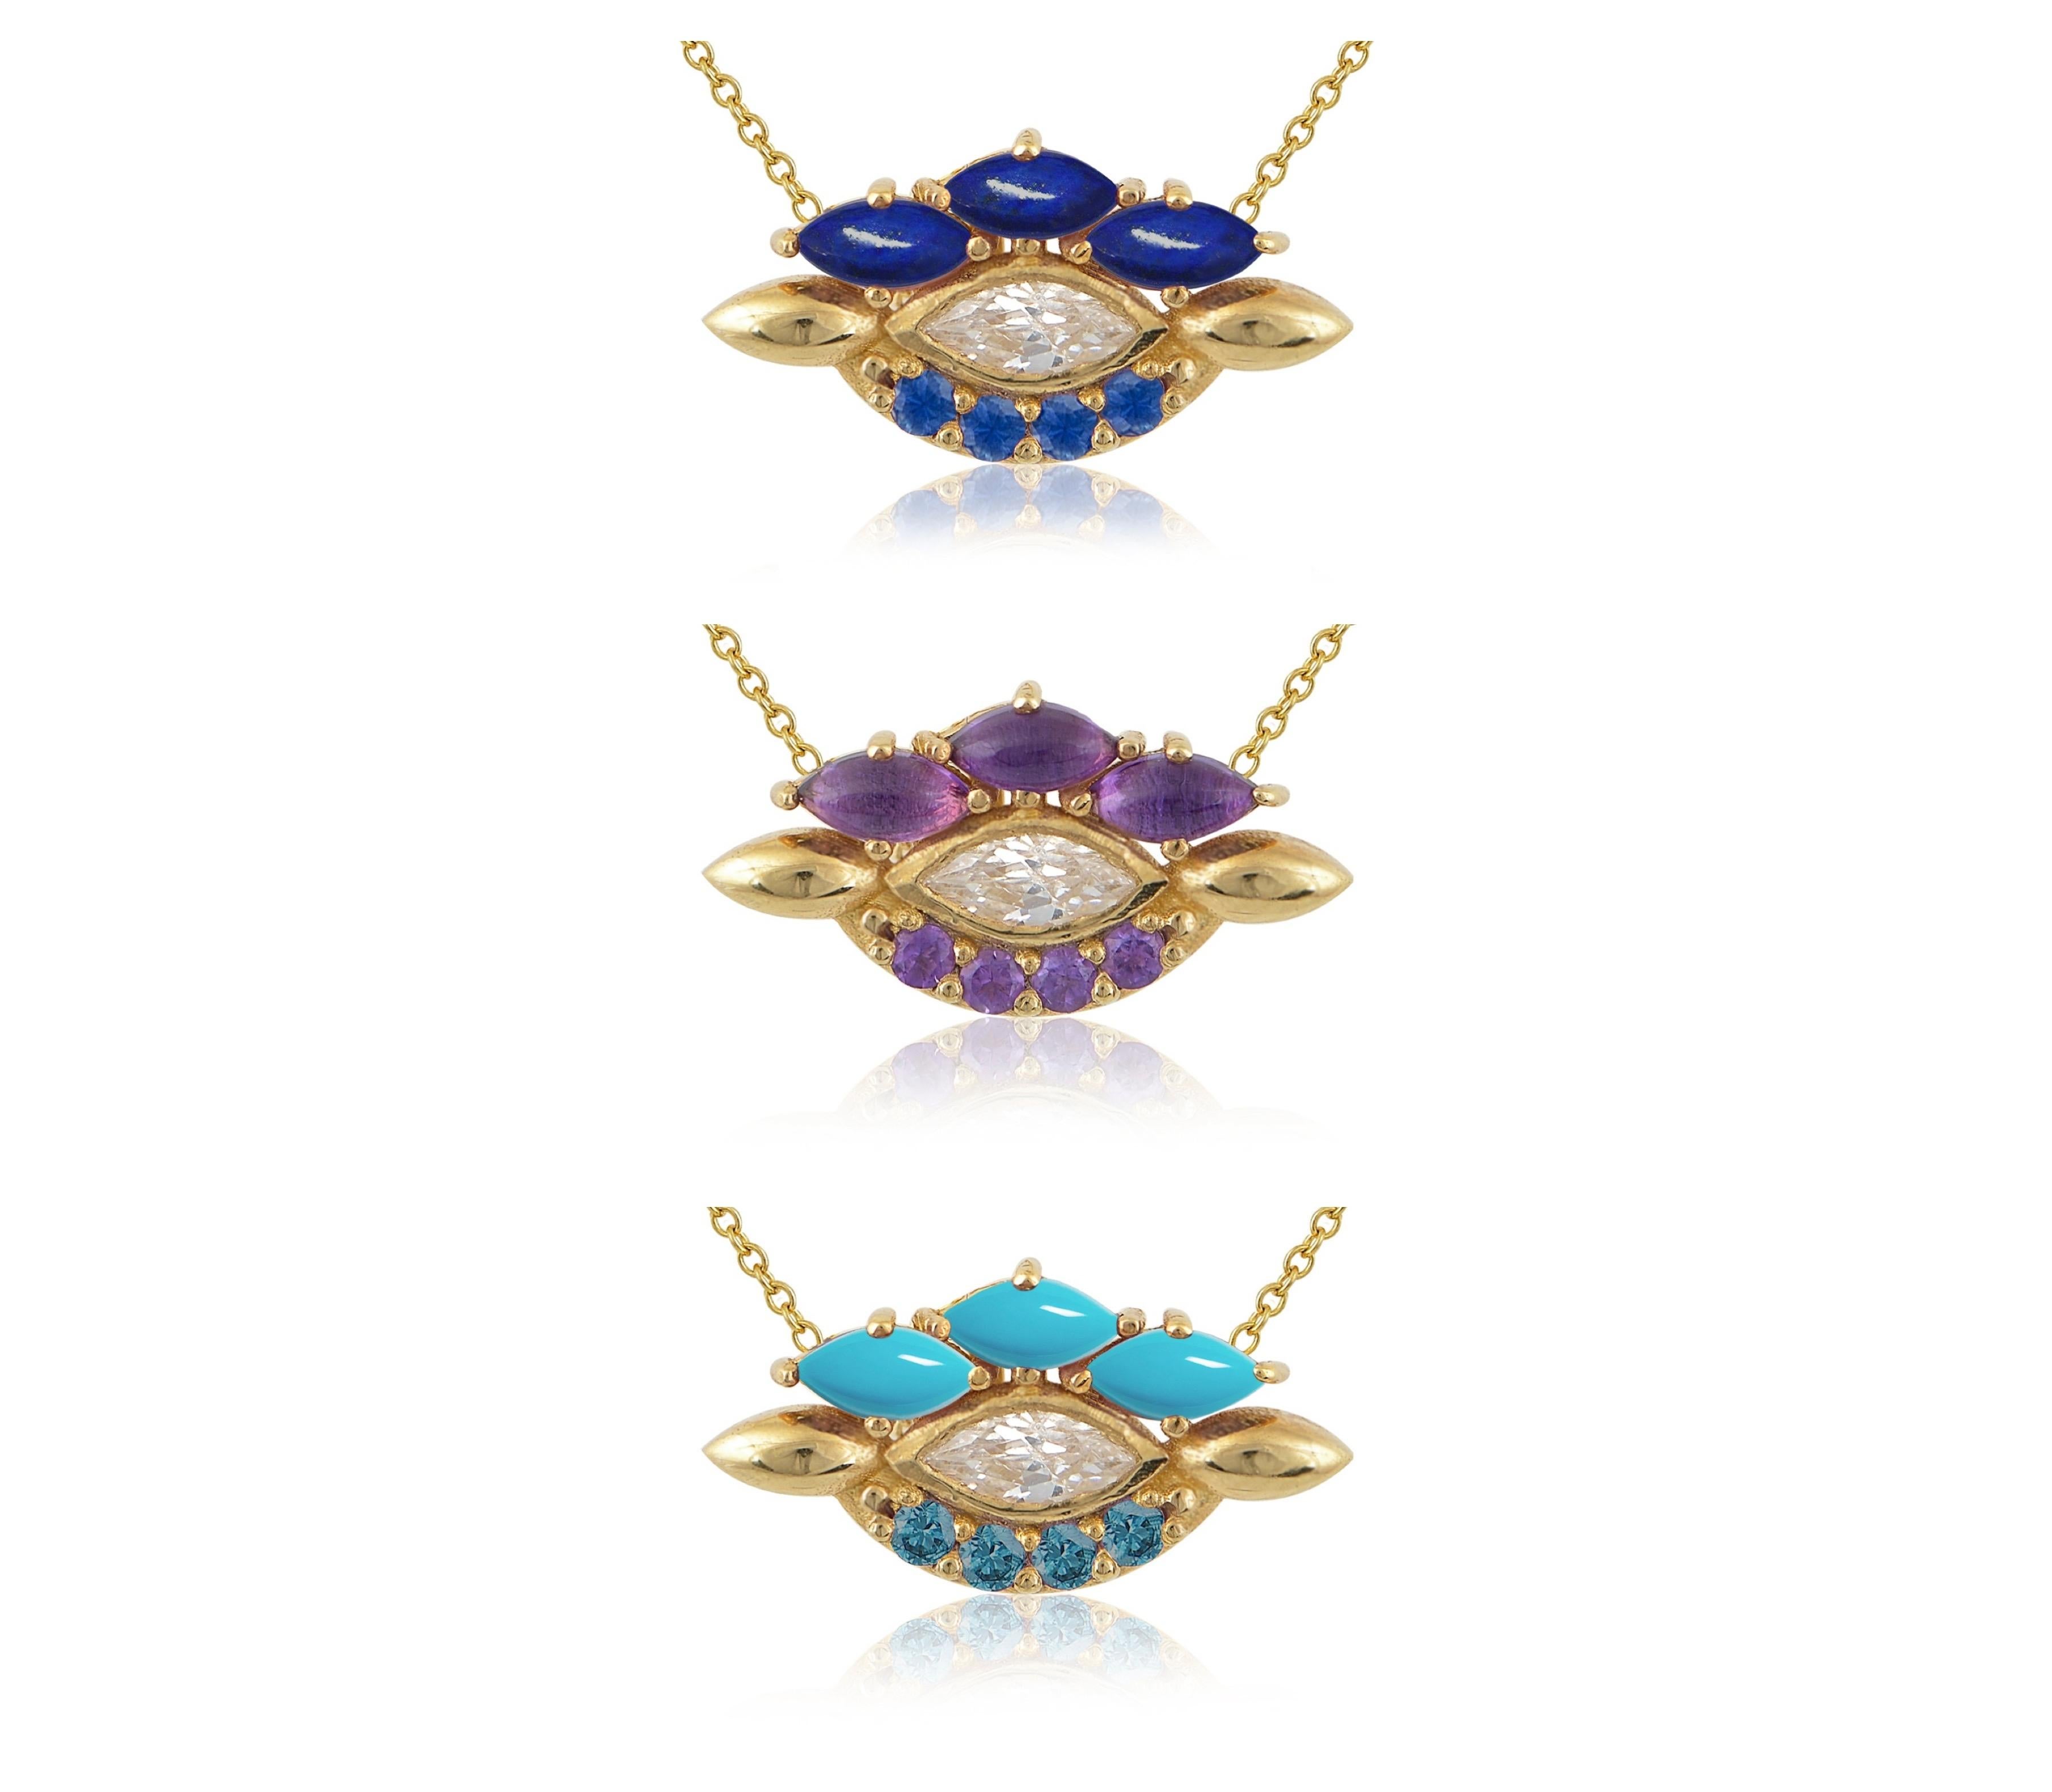 Contemporary Eye Pendant in 18 Karat Yellow Gold With A Diamond, Lapis And Sapphires For Sale